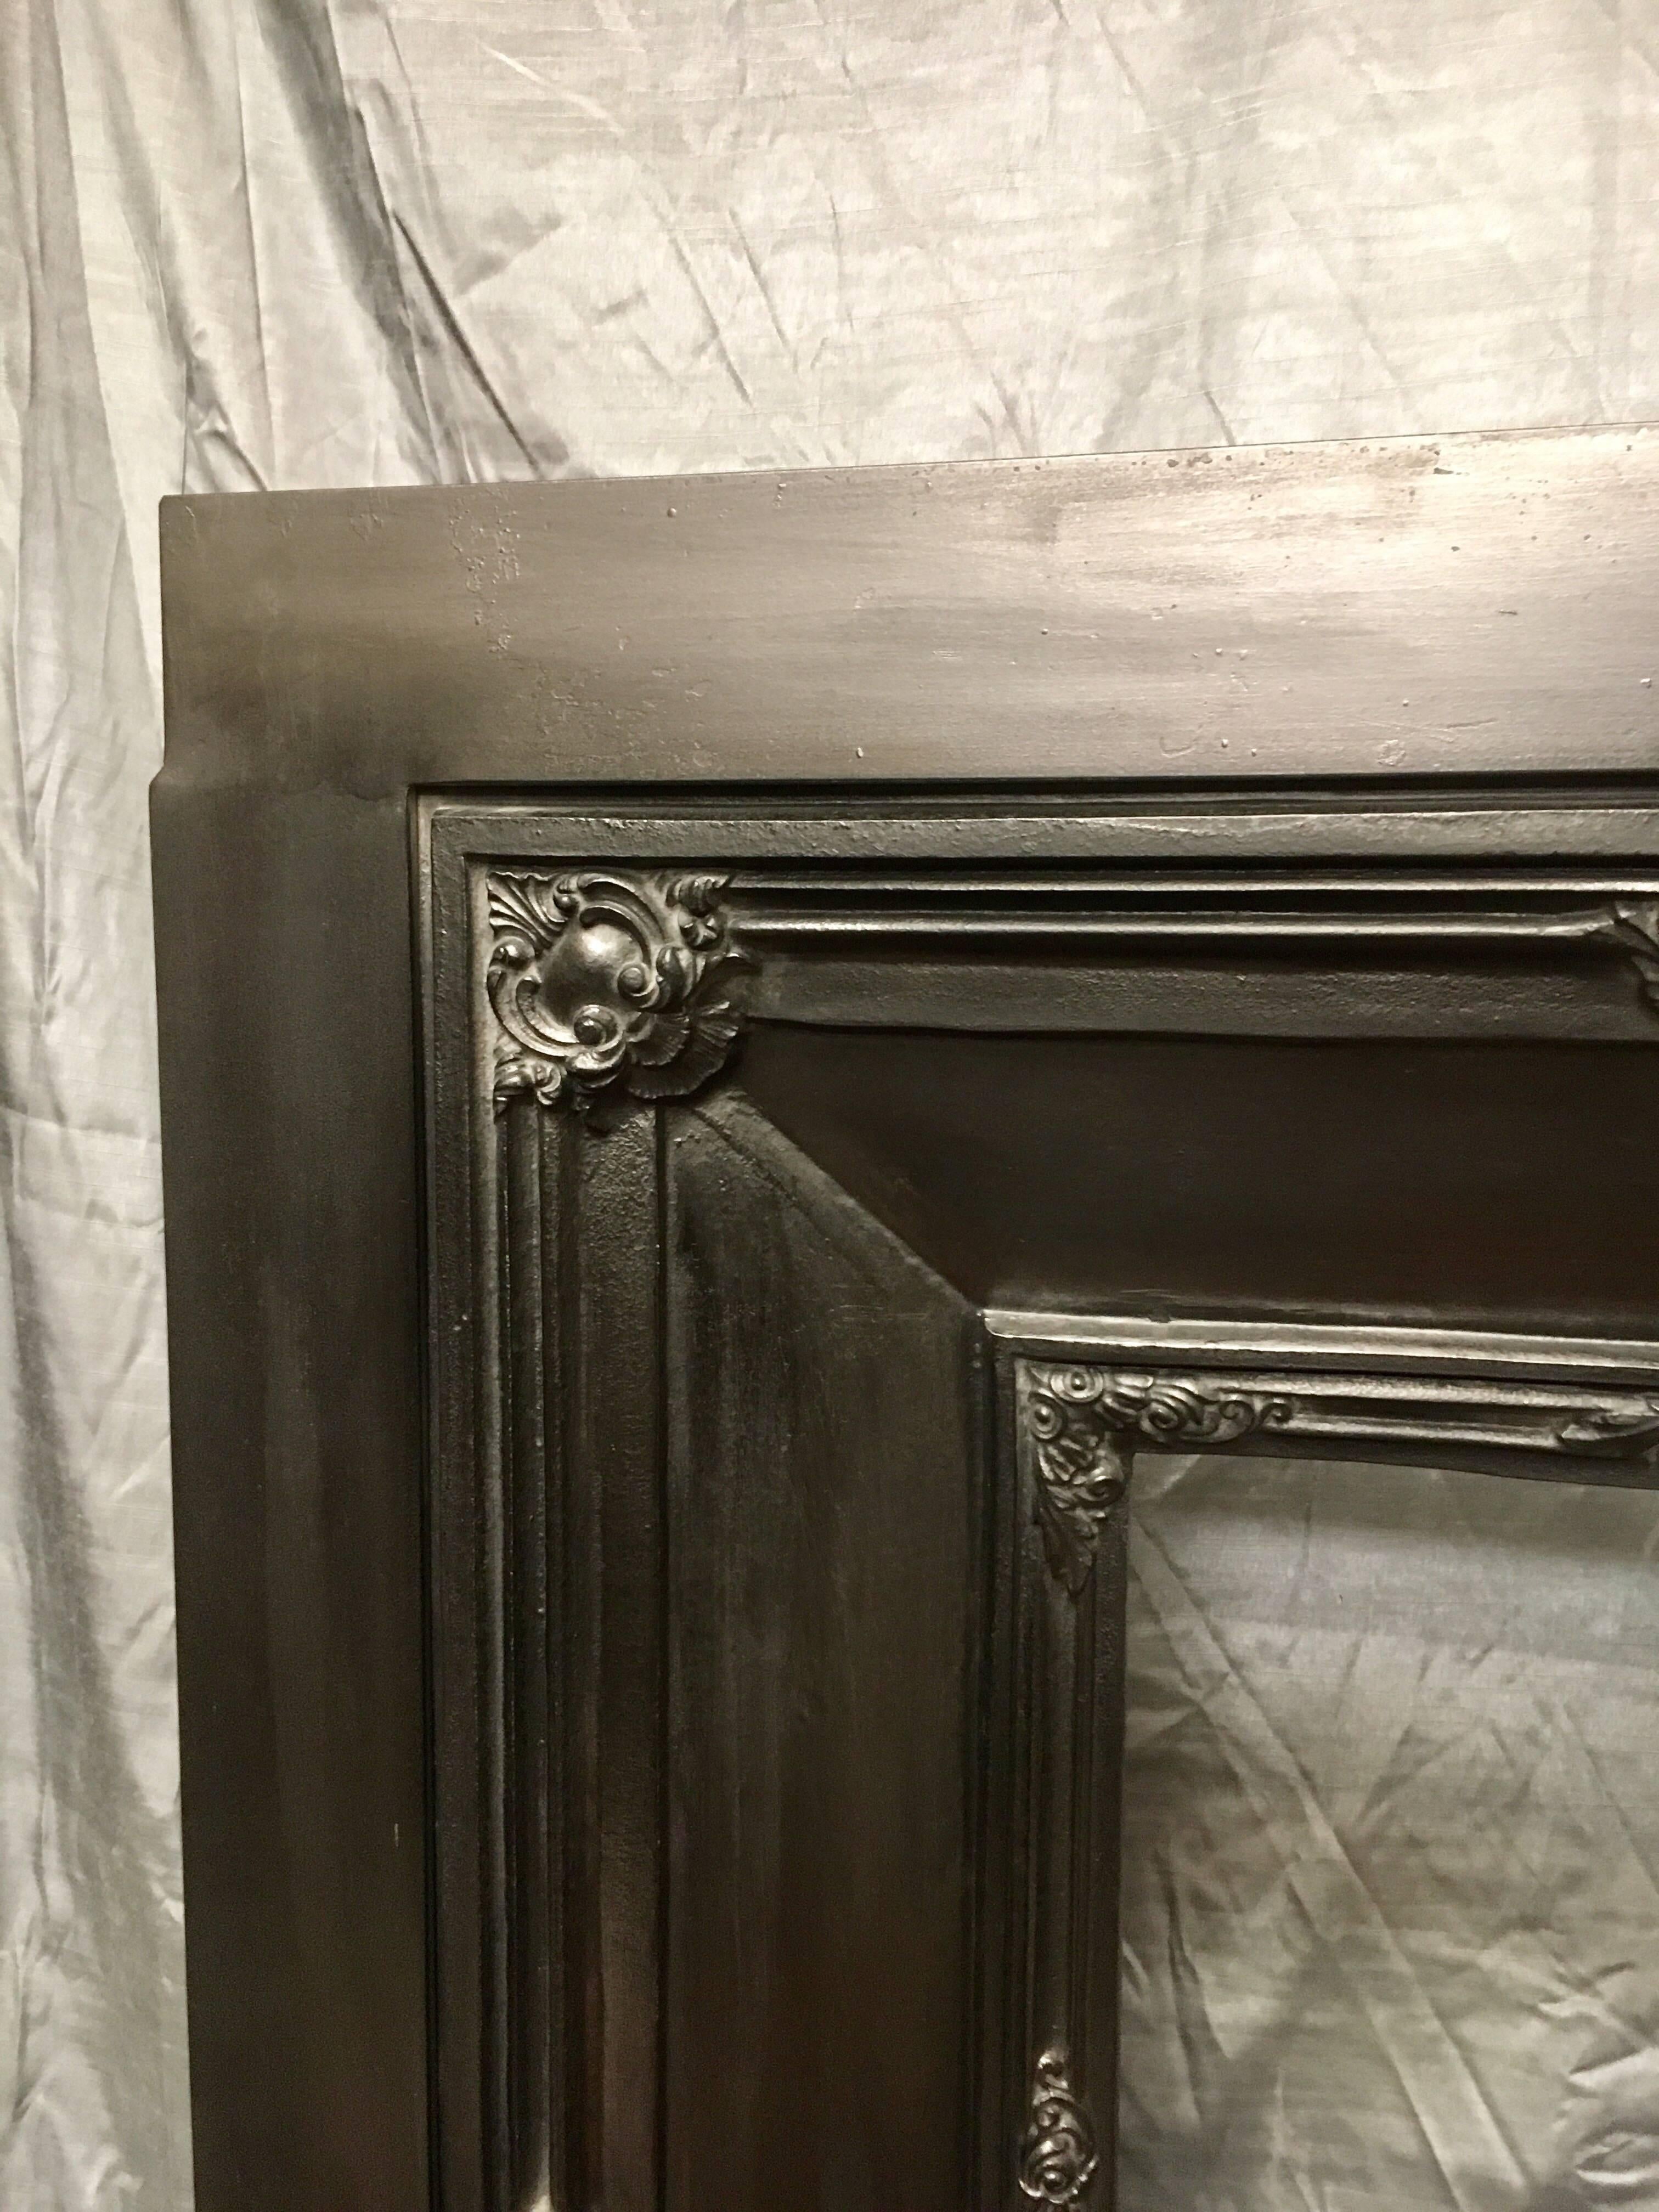 A small and well cast, antique victorian cast iron fireplace insert. Fully refurbished, painted with heat proof paint and graphite polished. A Scottish piece probably cast in Falkirk, Scotland around 1870c.

Fire opening size: 355mm wide x 650mm